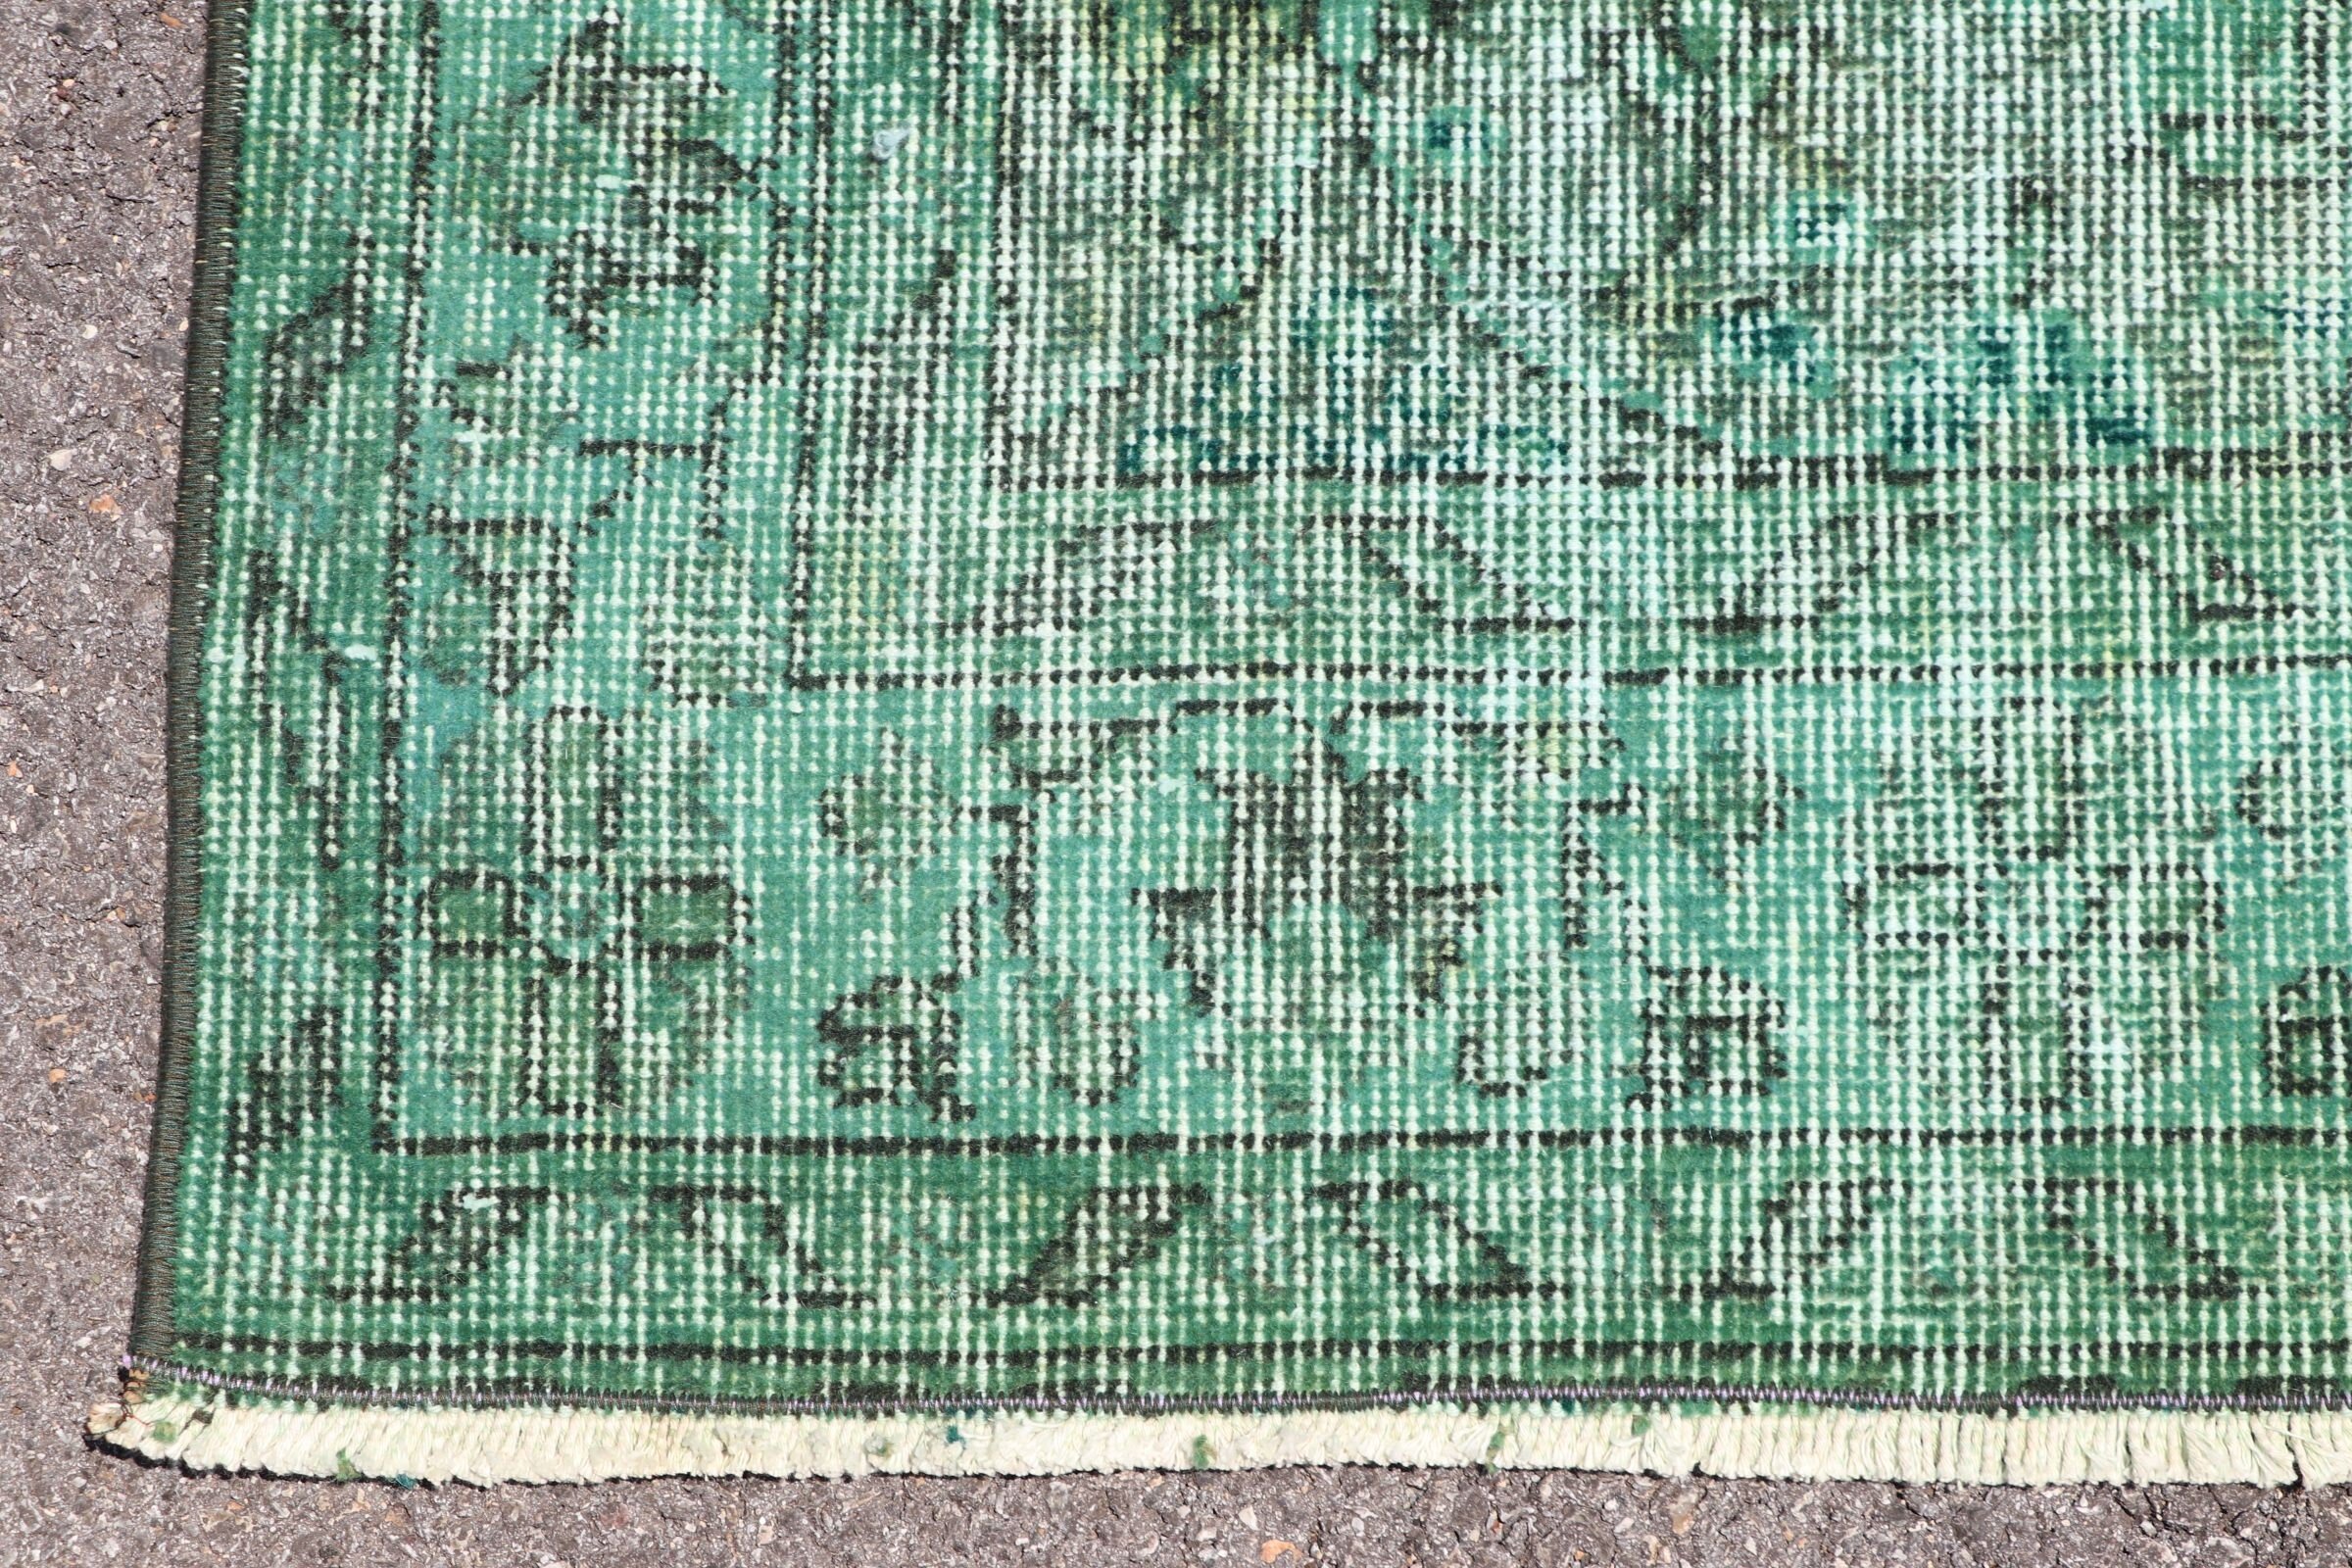 3.7x6.4 ft Accent Rugs, Rugs for Kitchen, Oriental Rugs, Turkish Rug, Vintage Rug, Nursery Rugs, Boho Rug, Kitchen Rug, Green Cool Rug